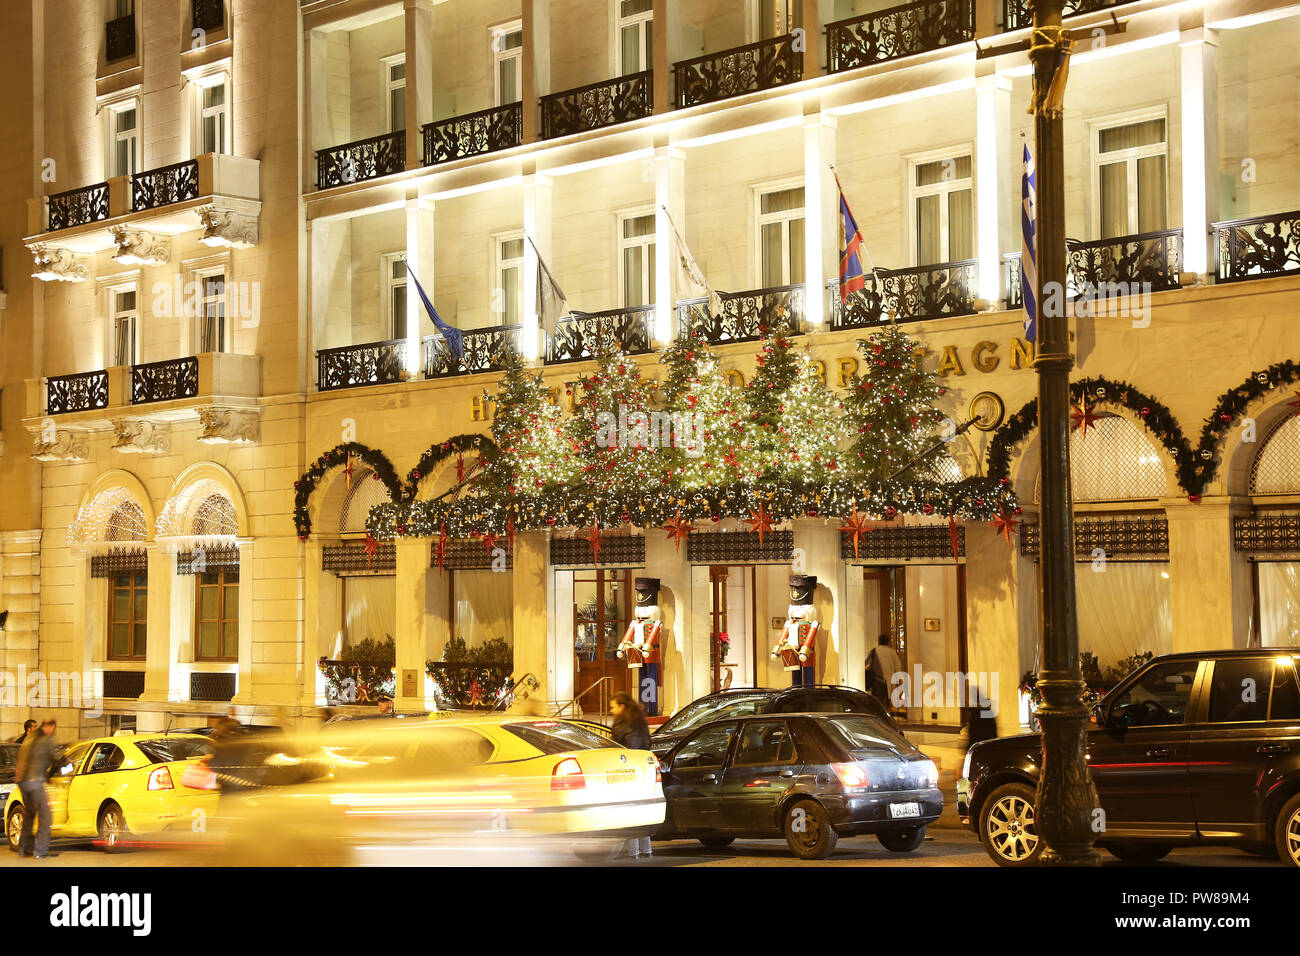 night photography of Grande Bretagne hotel Athens Greece with Christmas decorative lights Stock Photo